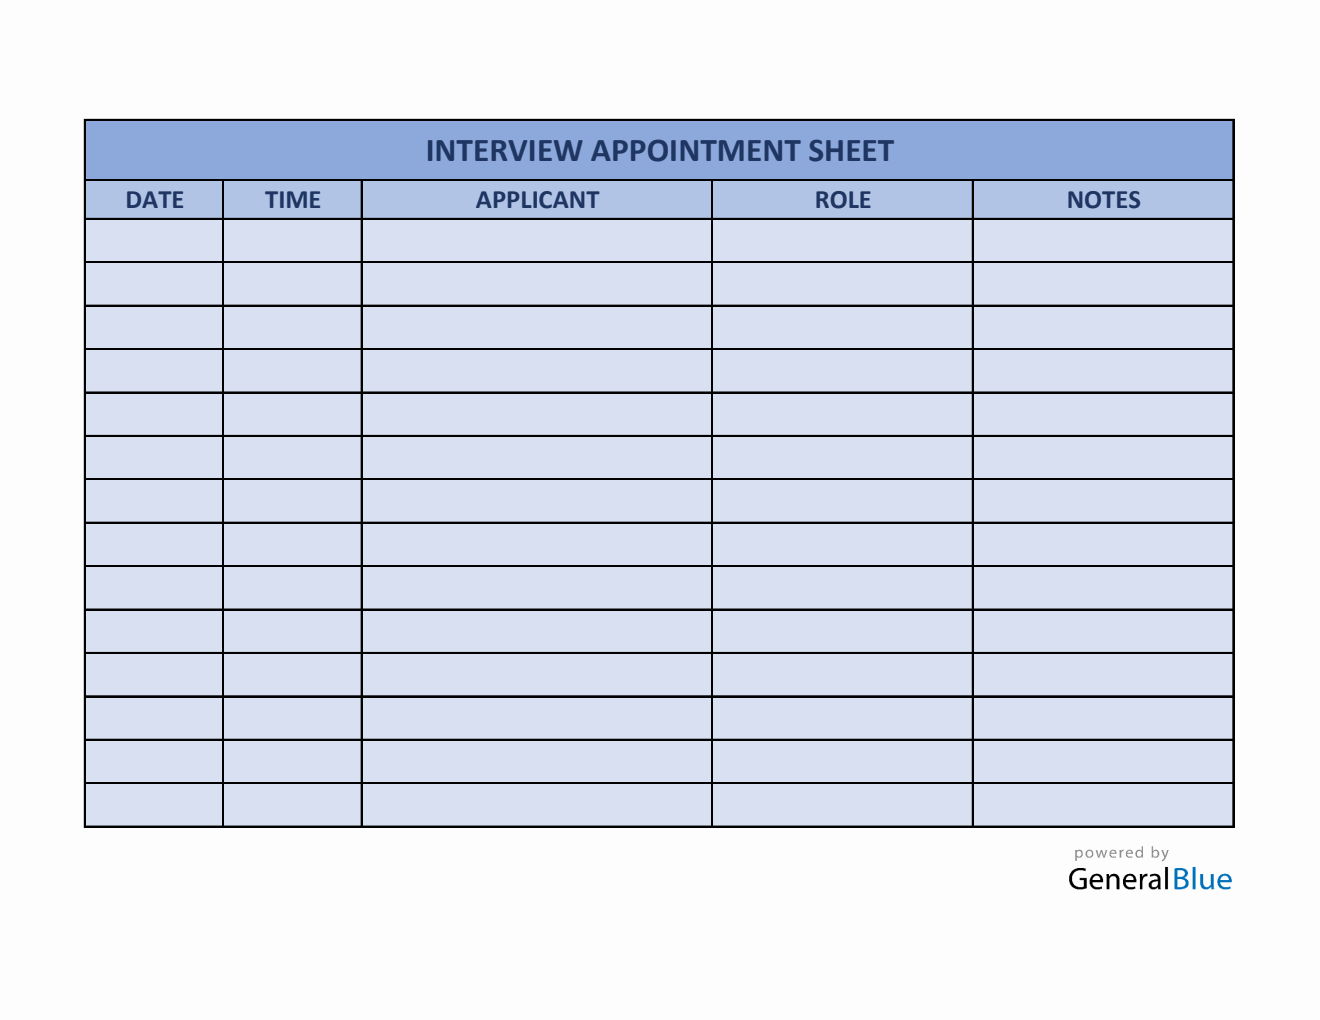 Interview Appointment Sheet Template in Excel (Colorful)